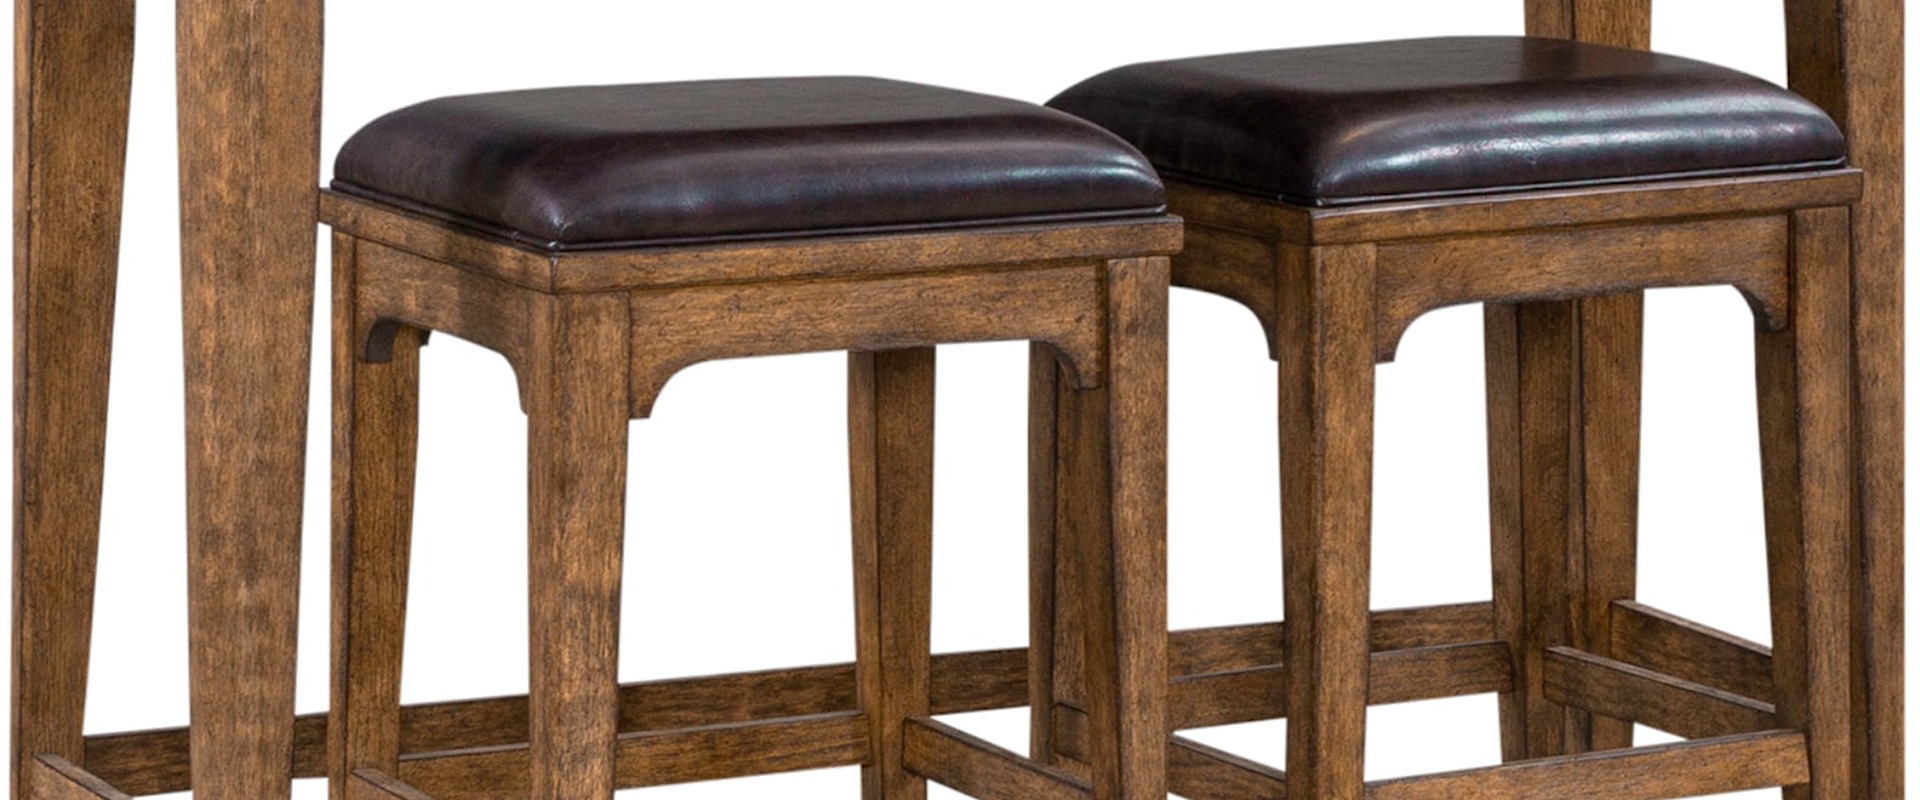 Rustic 3-Piece Console Set with Leather Upholstered Seats